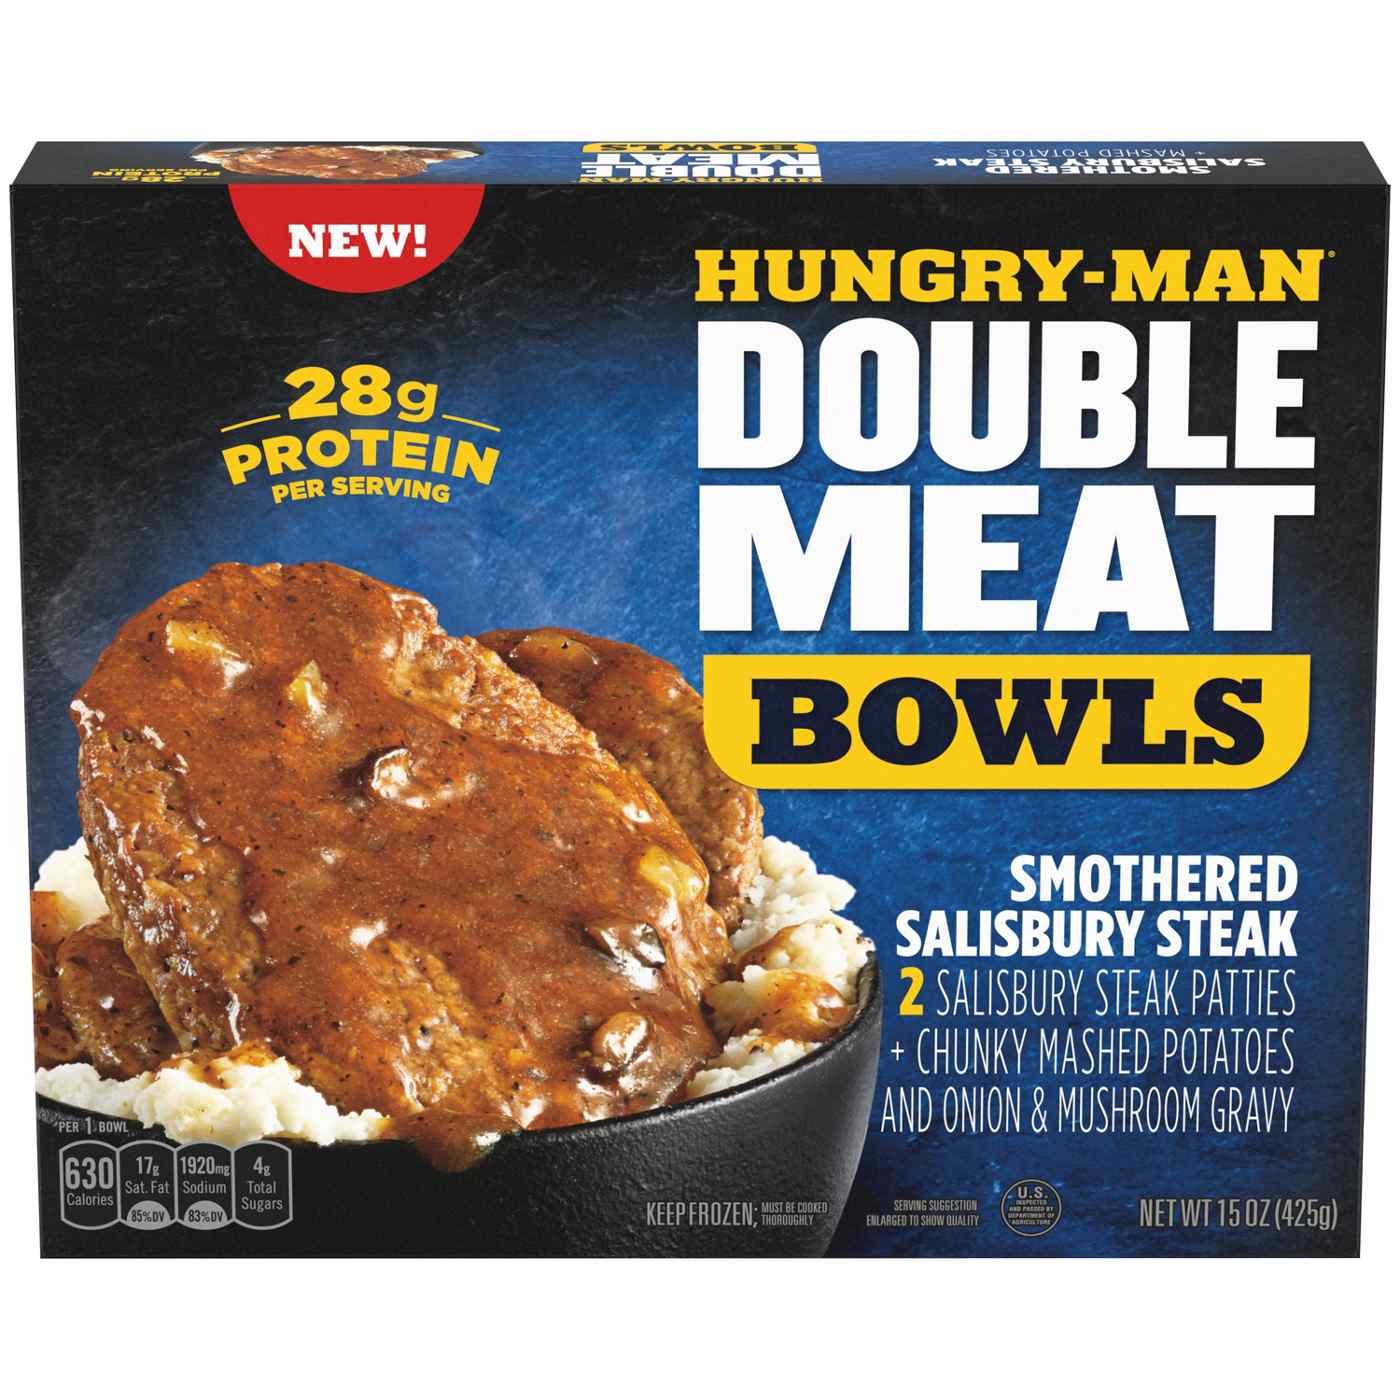 Hungry-Man Double Meat Bowls Smothered Salisbury Steaks Frozen Meal; image 1 of 7